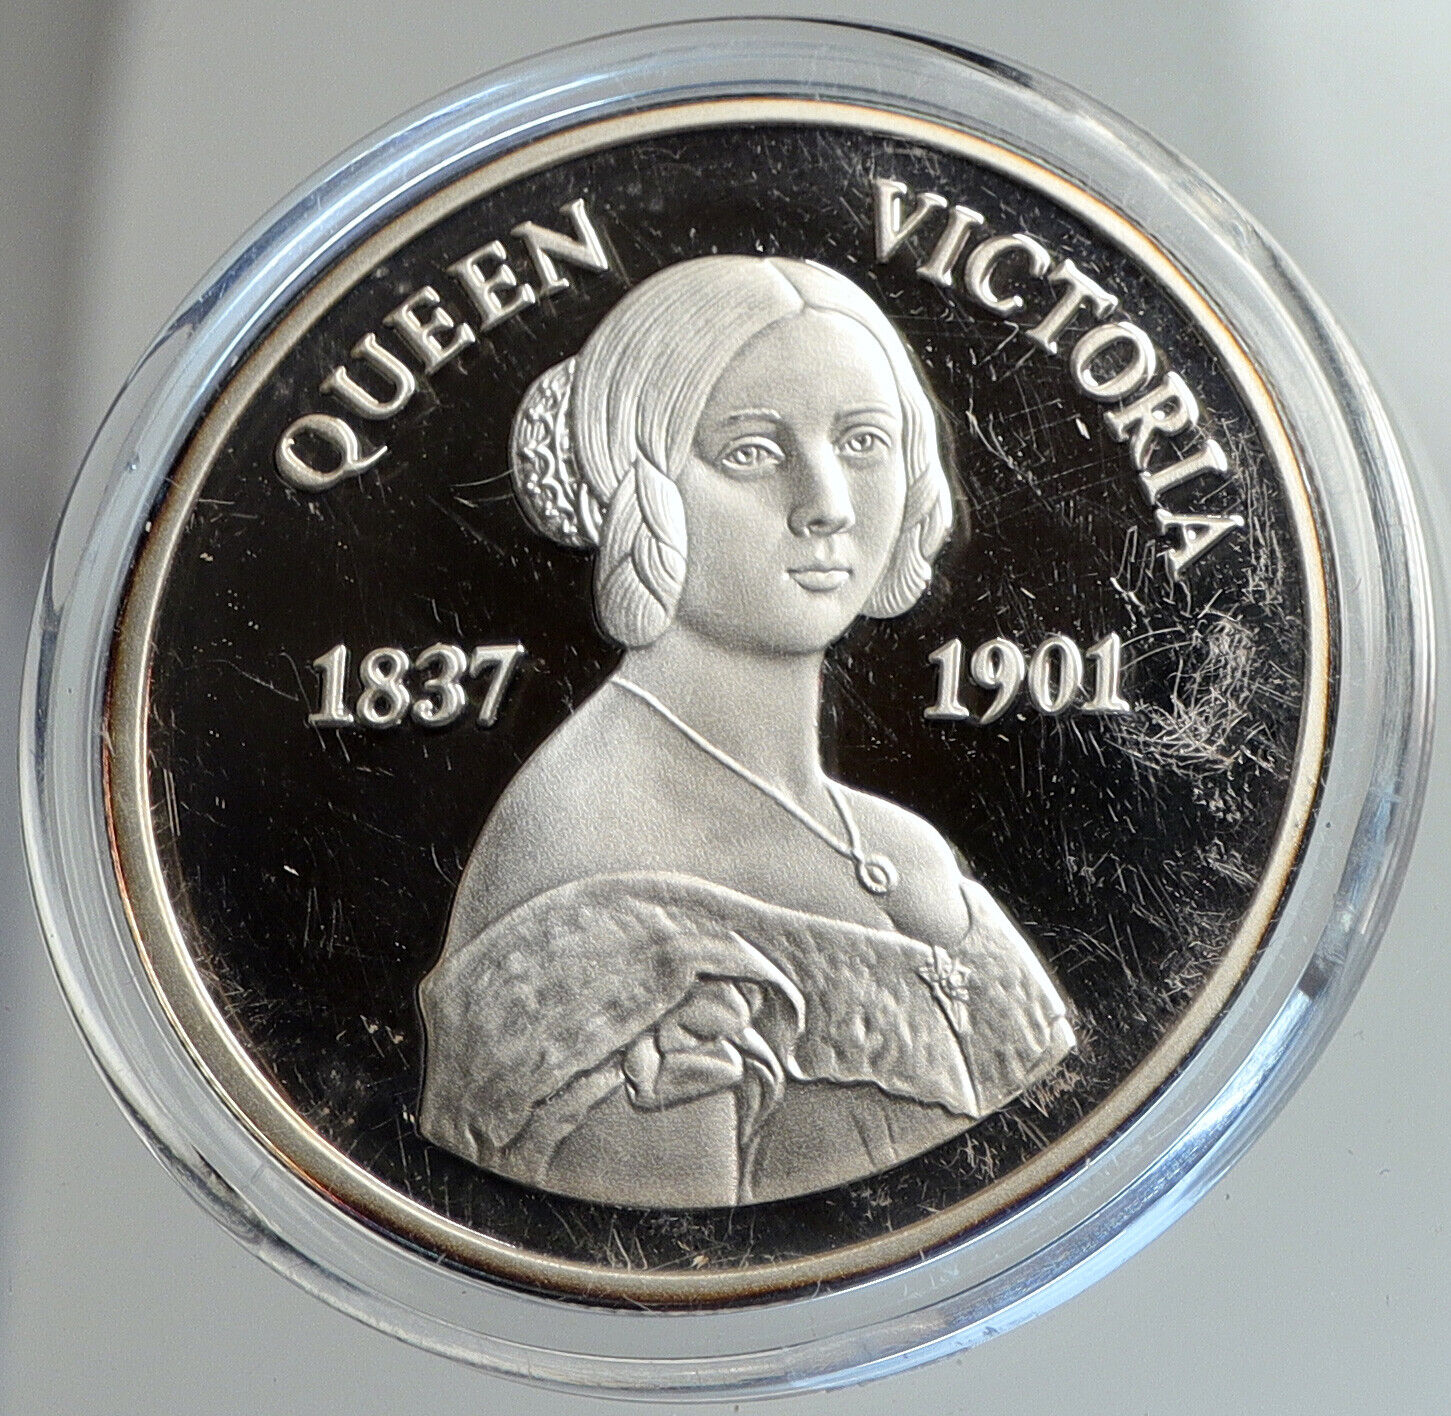 2001 TURKS & CAICOS Older UK Queen Victoria Proof Silver 20 Crown Coin i112415